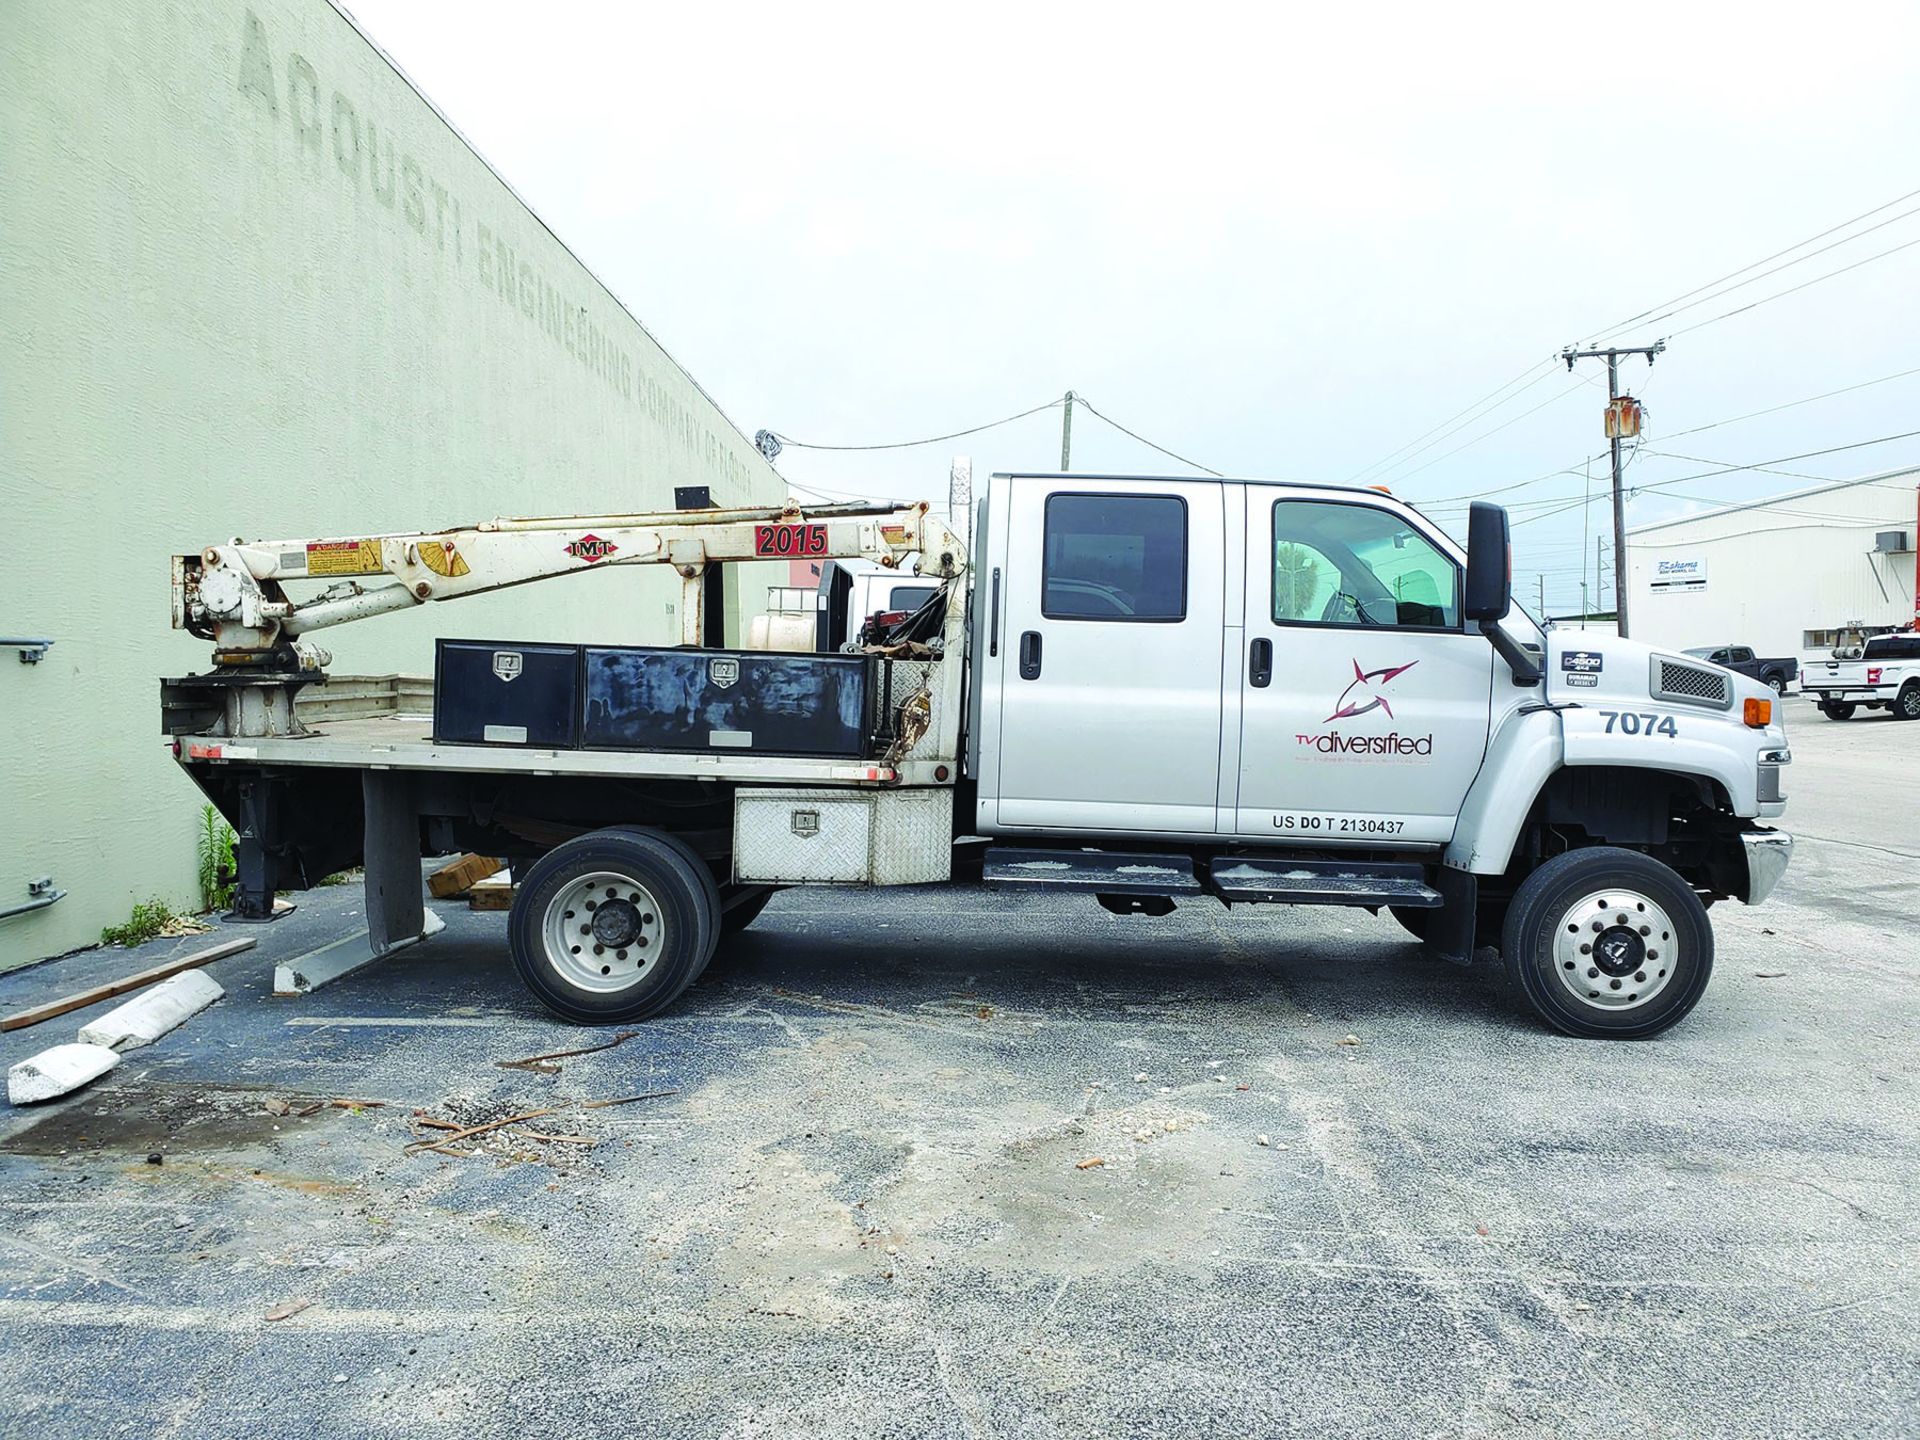 2006 CHEVROLET C4500 4X4 CREW CAB FLAT/STAKE BED TRUCK W/IMT 2015 TELESCOPING BOOM, 2.5 TON HOOK, - Image 9 of 19